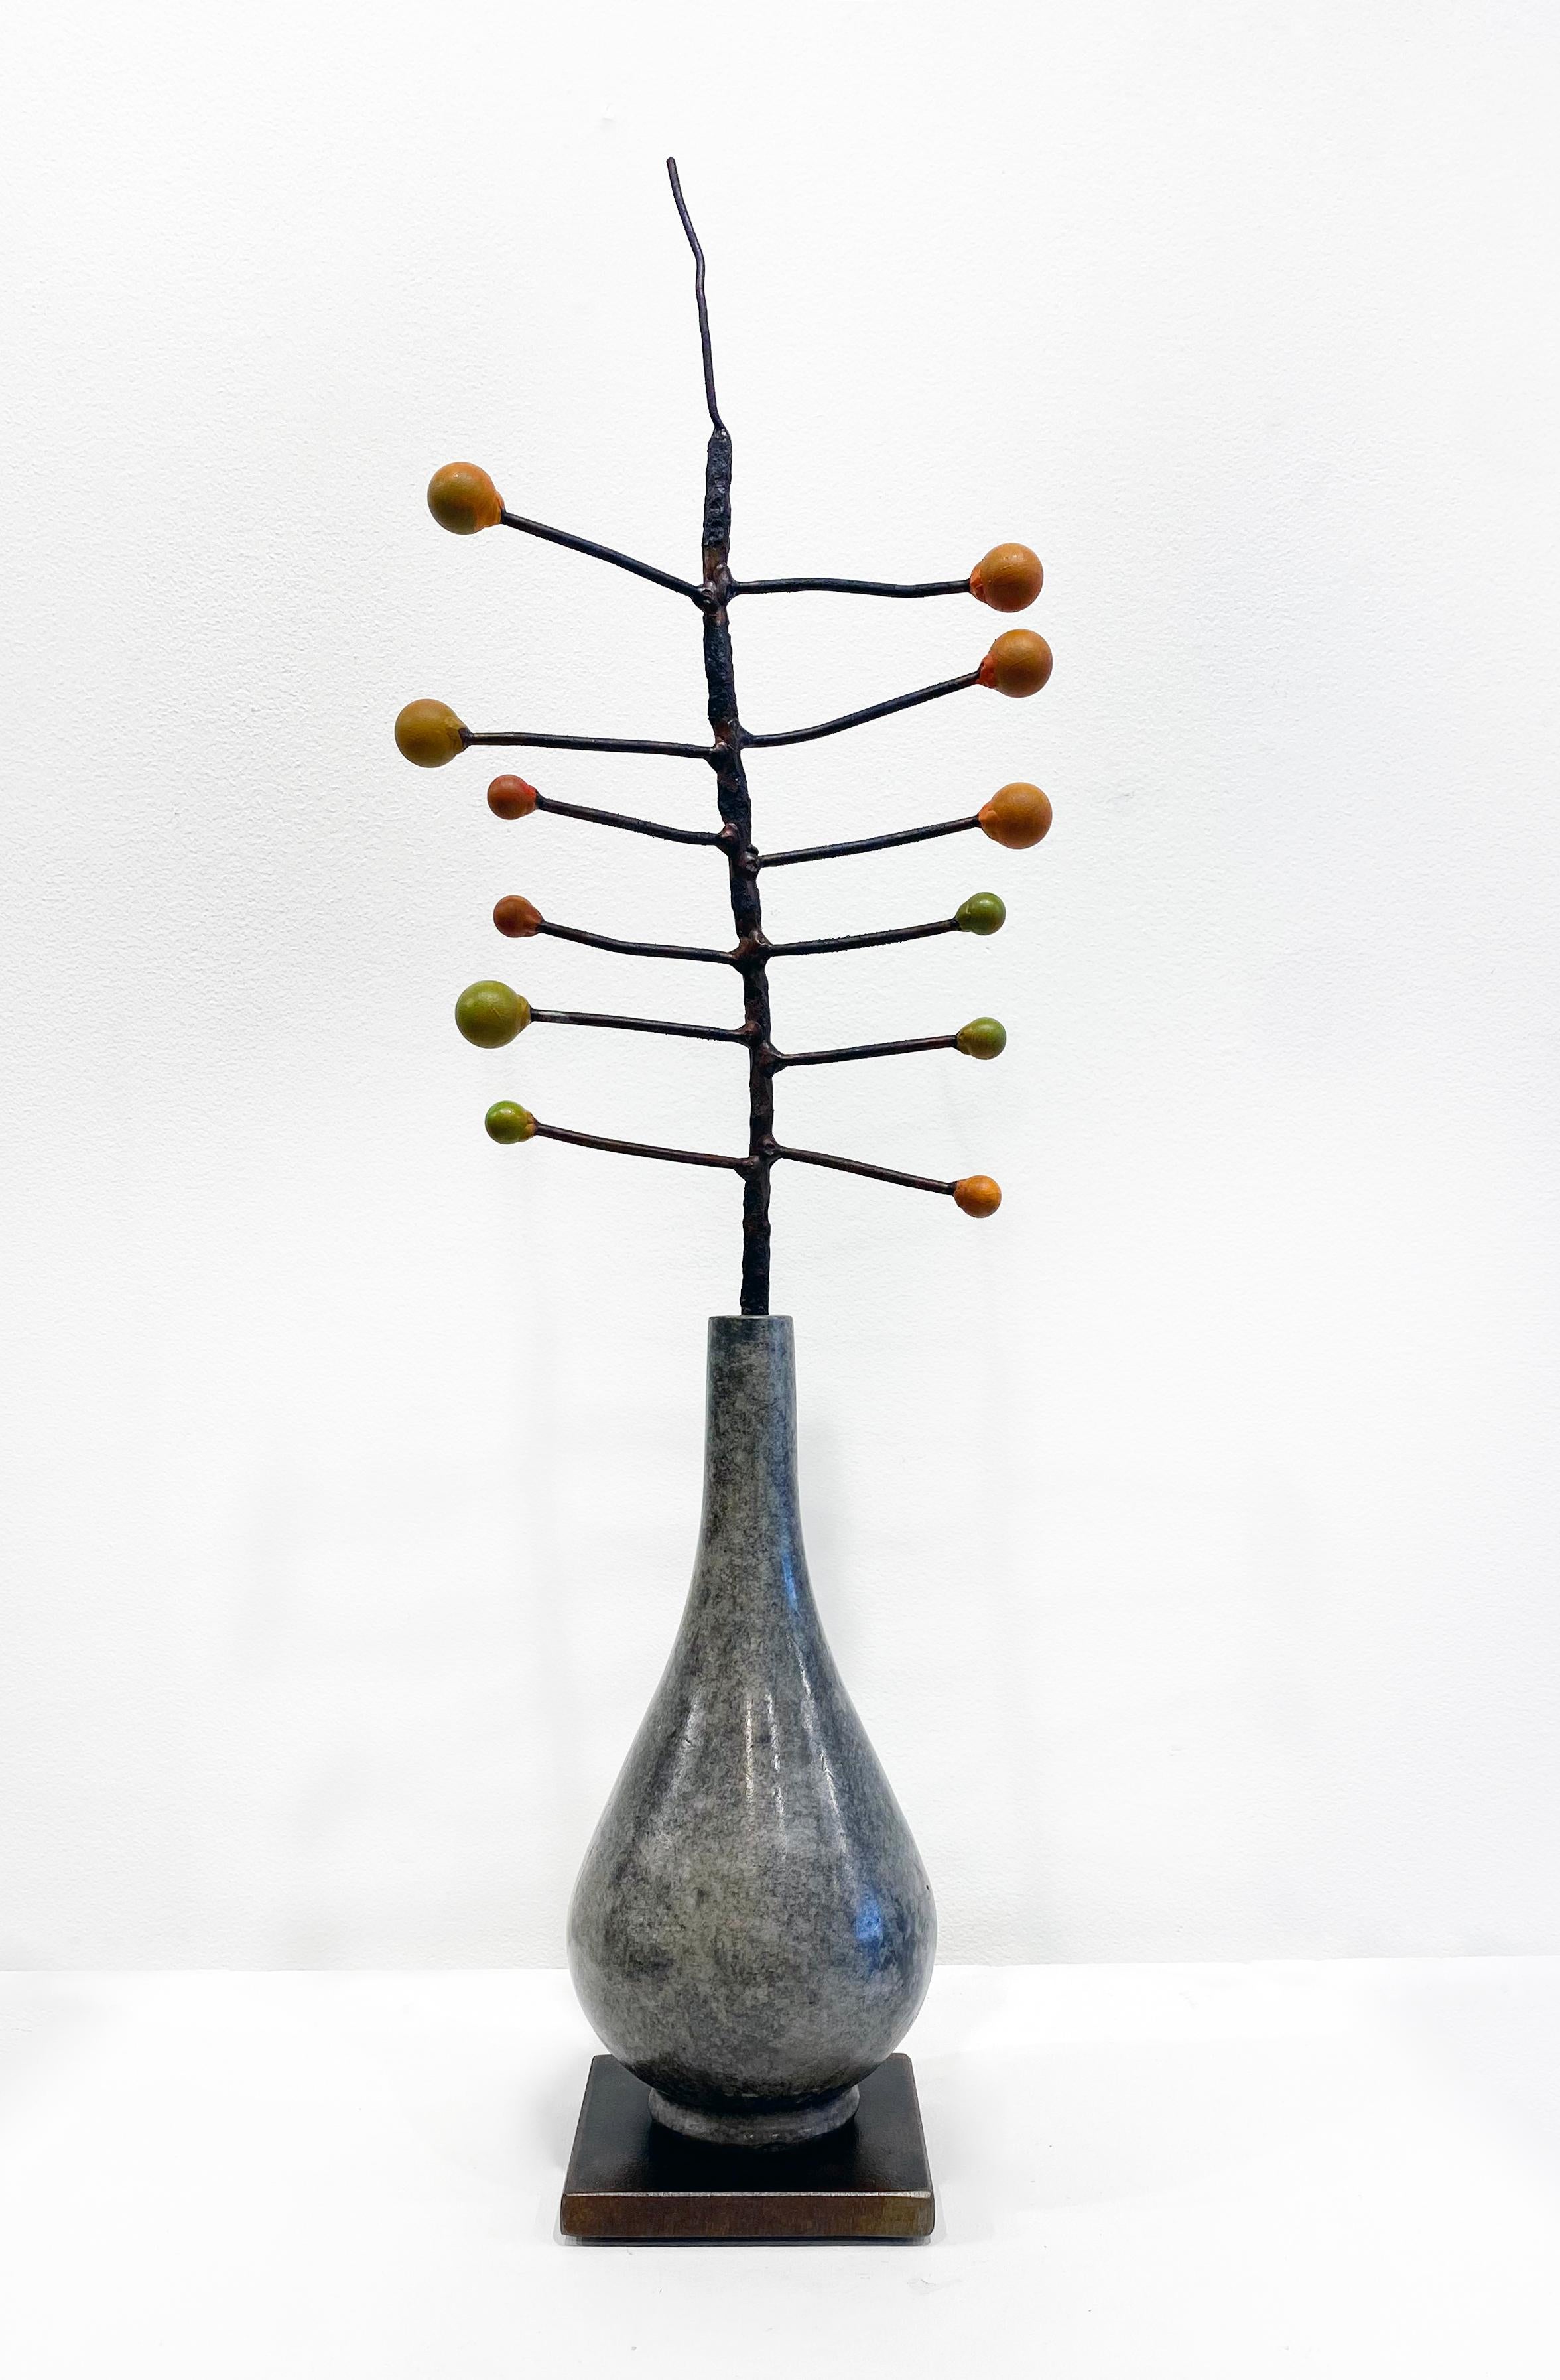 'Seeds' by David Kimball Anderson, 2022. Bronze, steel, and paint, 24 x 8 x 6 in. This sculpture features a classic rounded vase cast in bronze and finished with a grey patina. It features a series of bronze branches with colorful green and orange